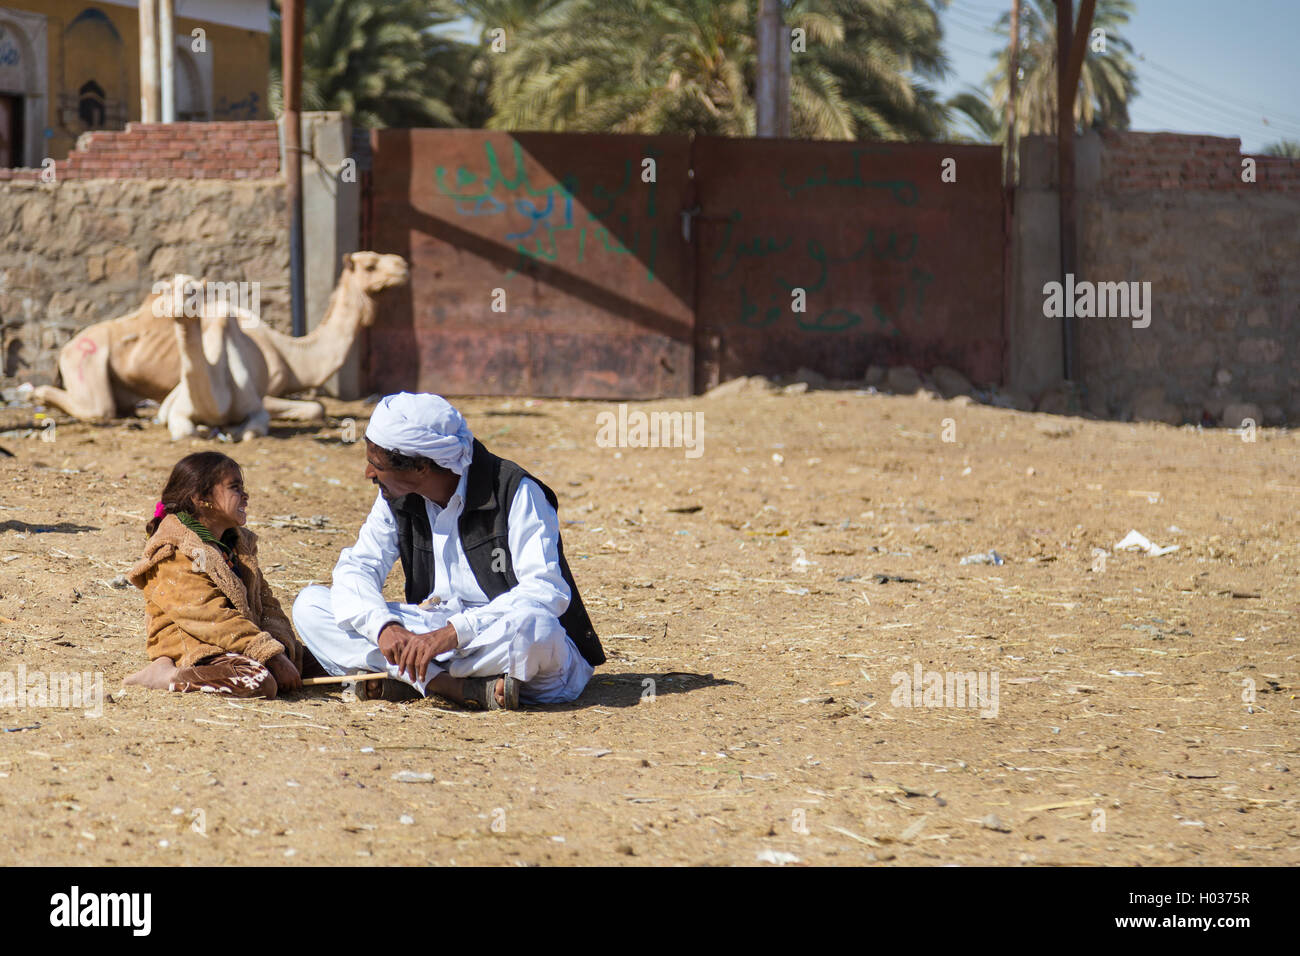 DARAW, EGYPT - FEBRUARY 6, 2016: Local camel salesmen and little girl sitting on the ground at camel market. Stock Photo